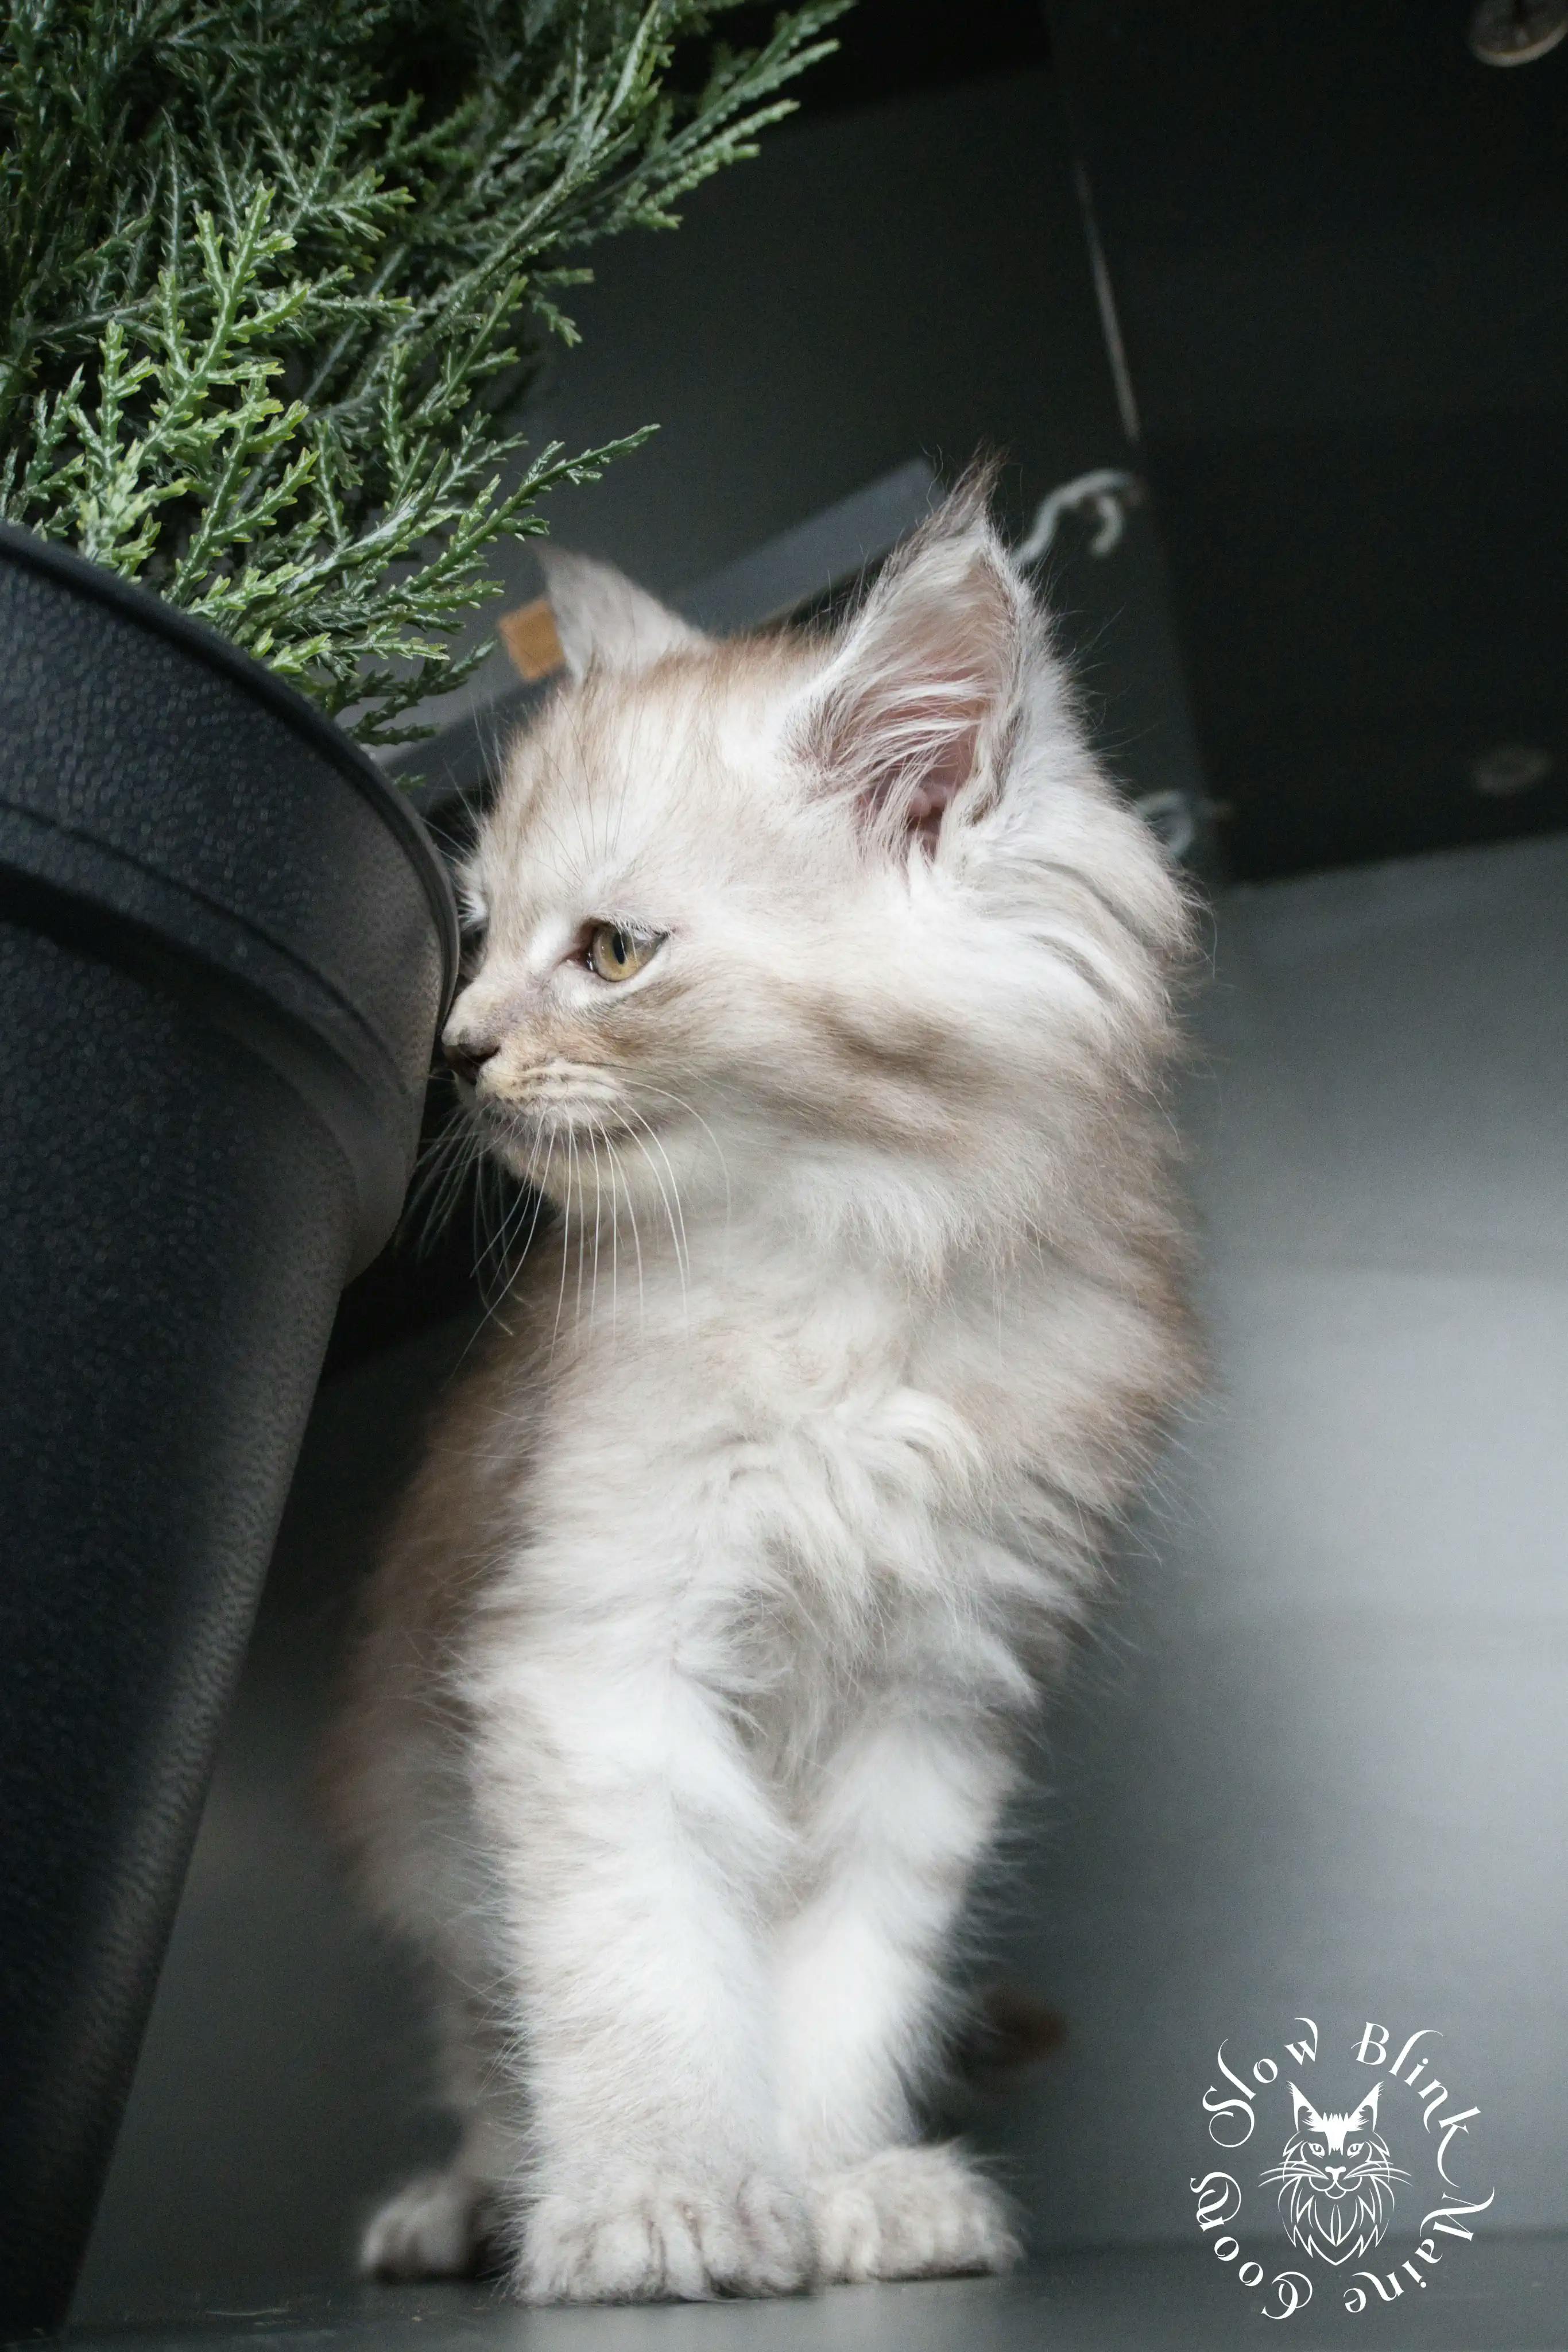 High Silver Maine Coon Kittens > black silver tabby maine coon kitten | ems code ns 22 23 24 25 | slowblinkmainecoons | 387